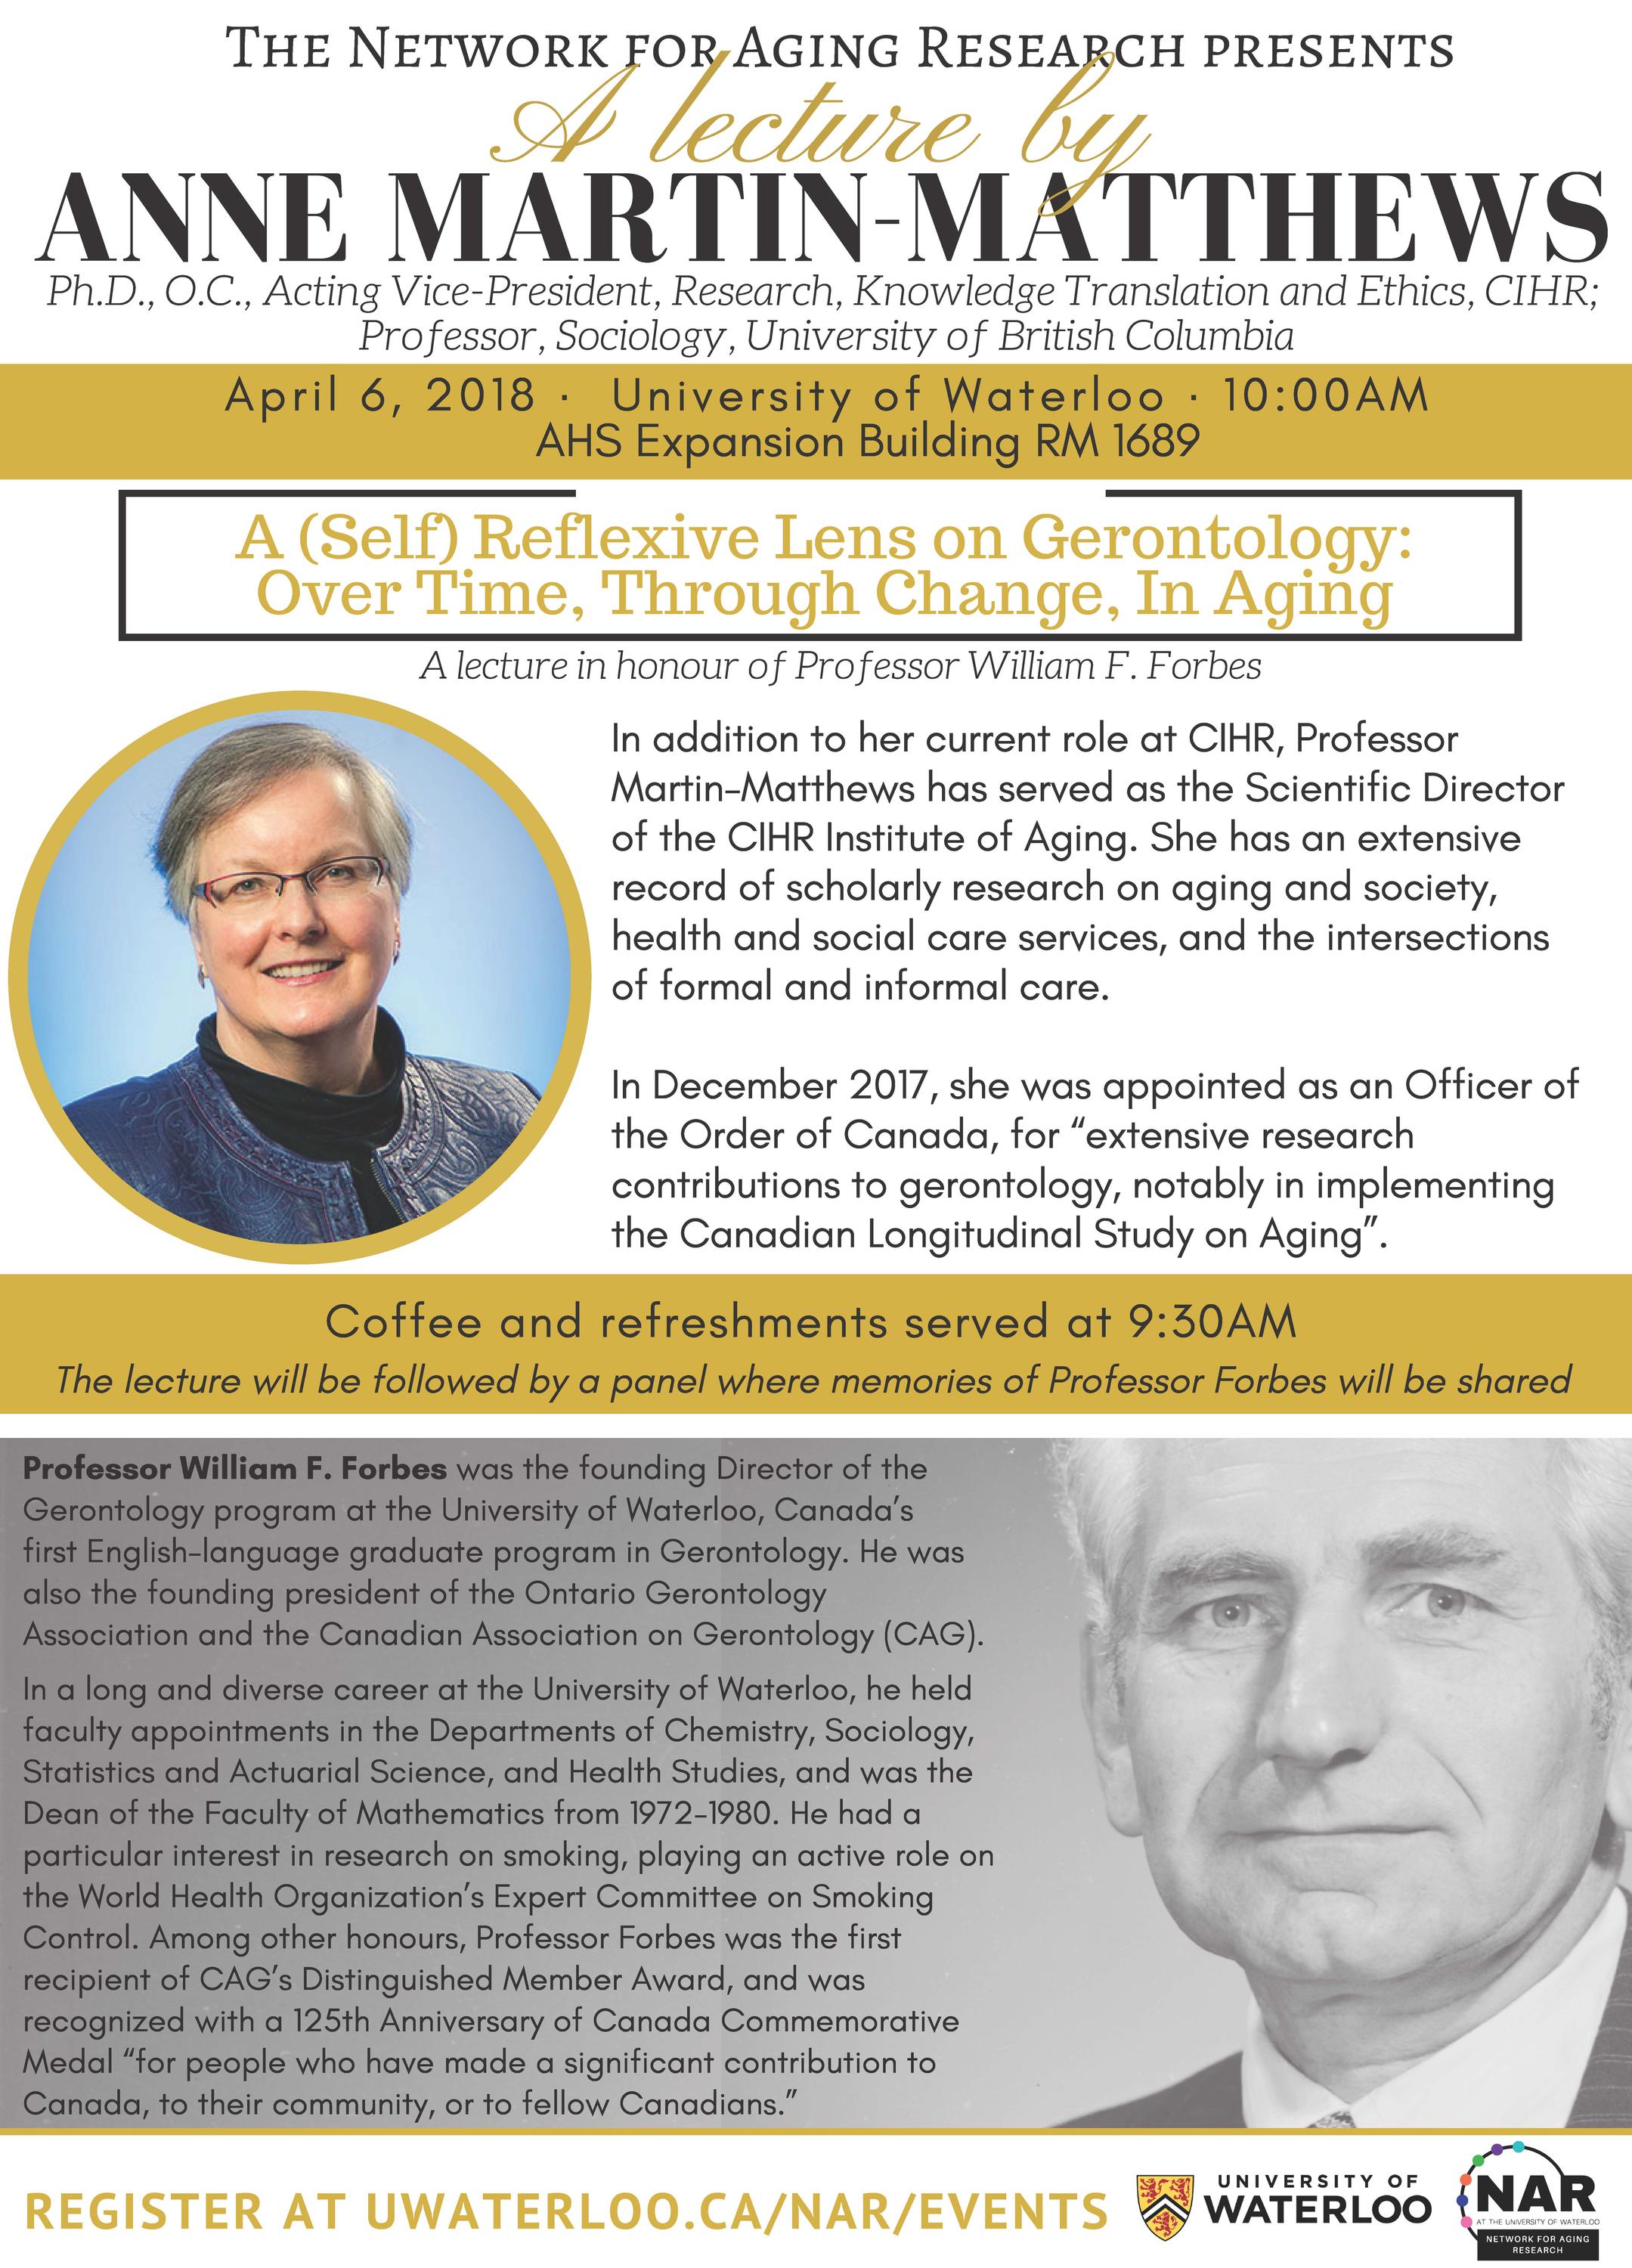 Information poster for the Dr. Anne Martin-Matthews lecture